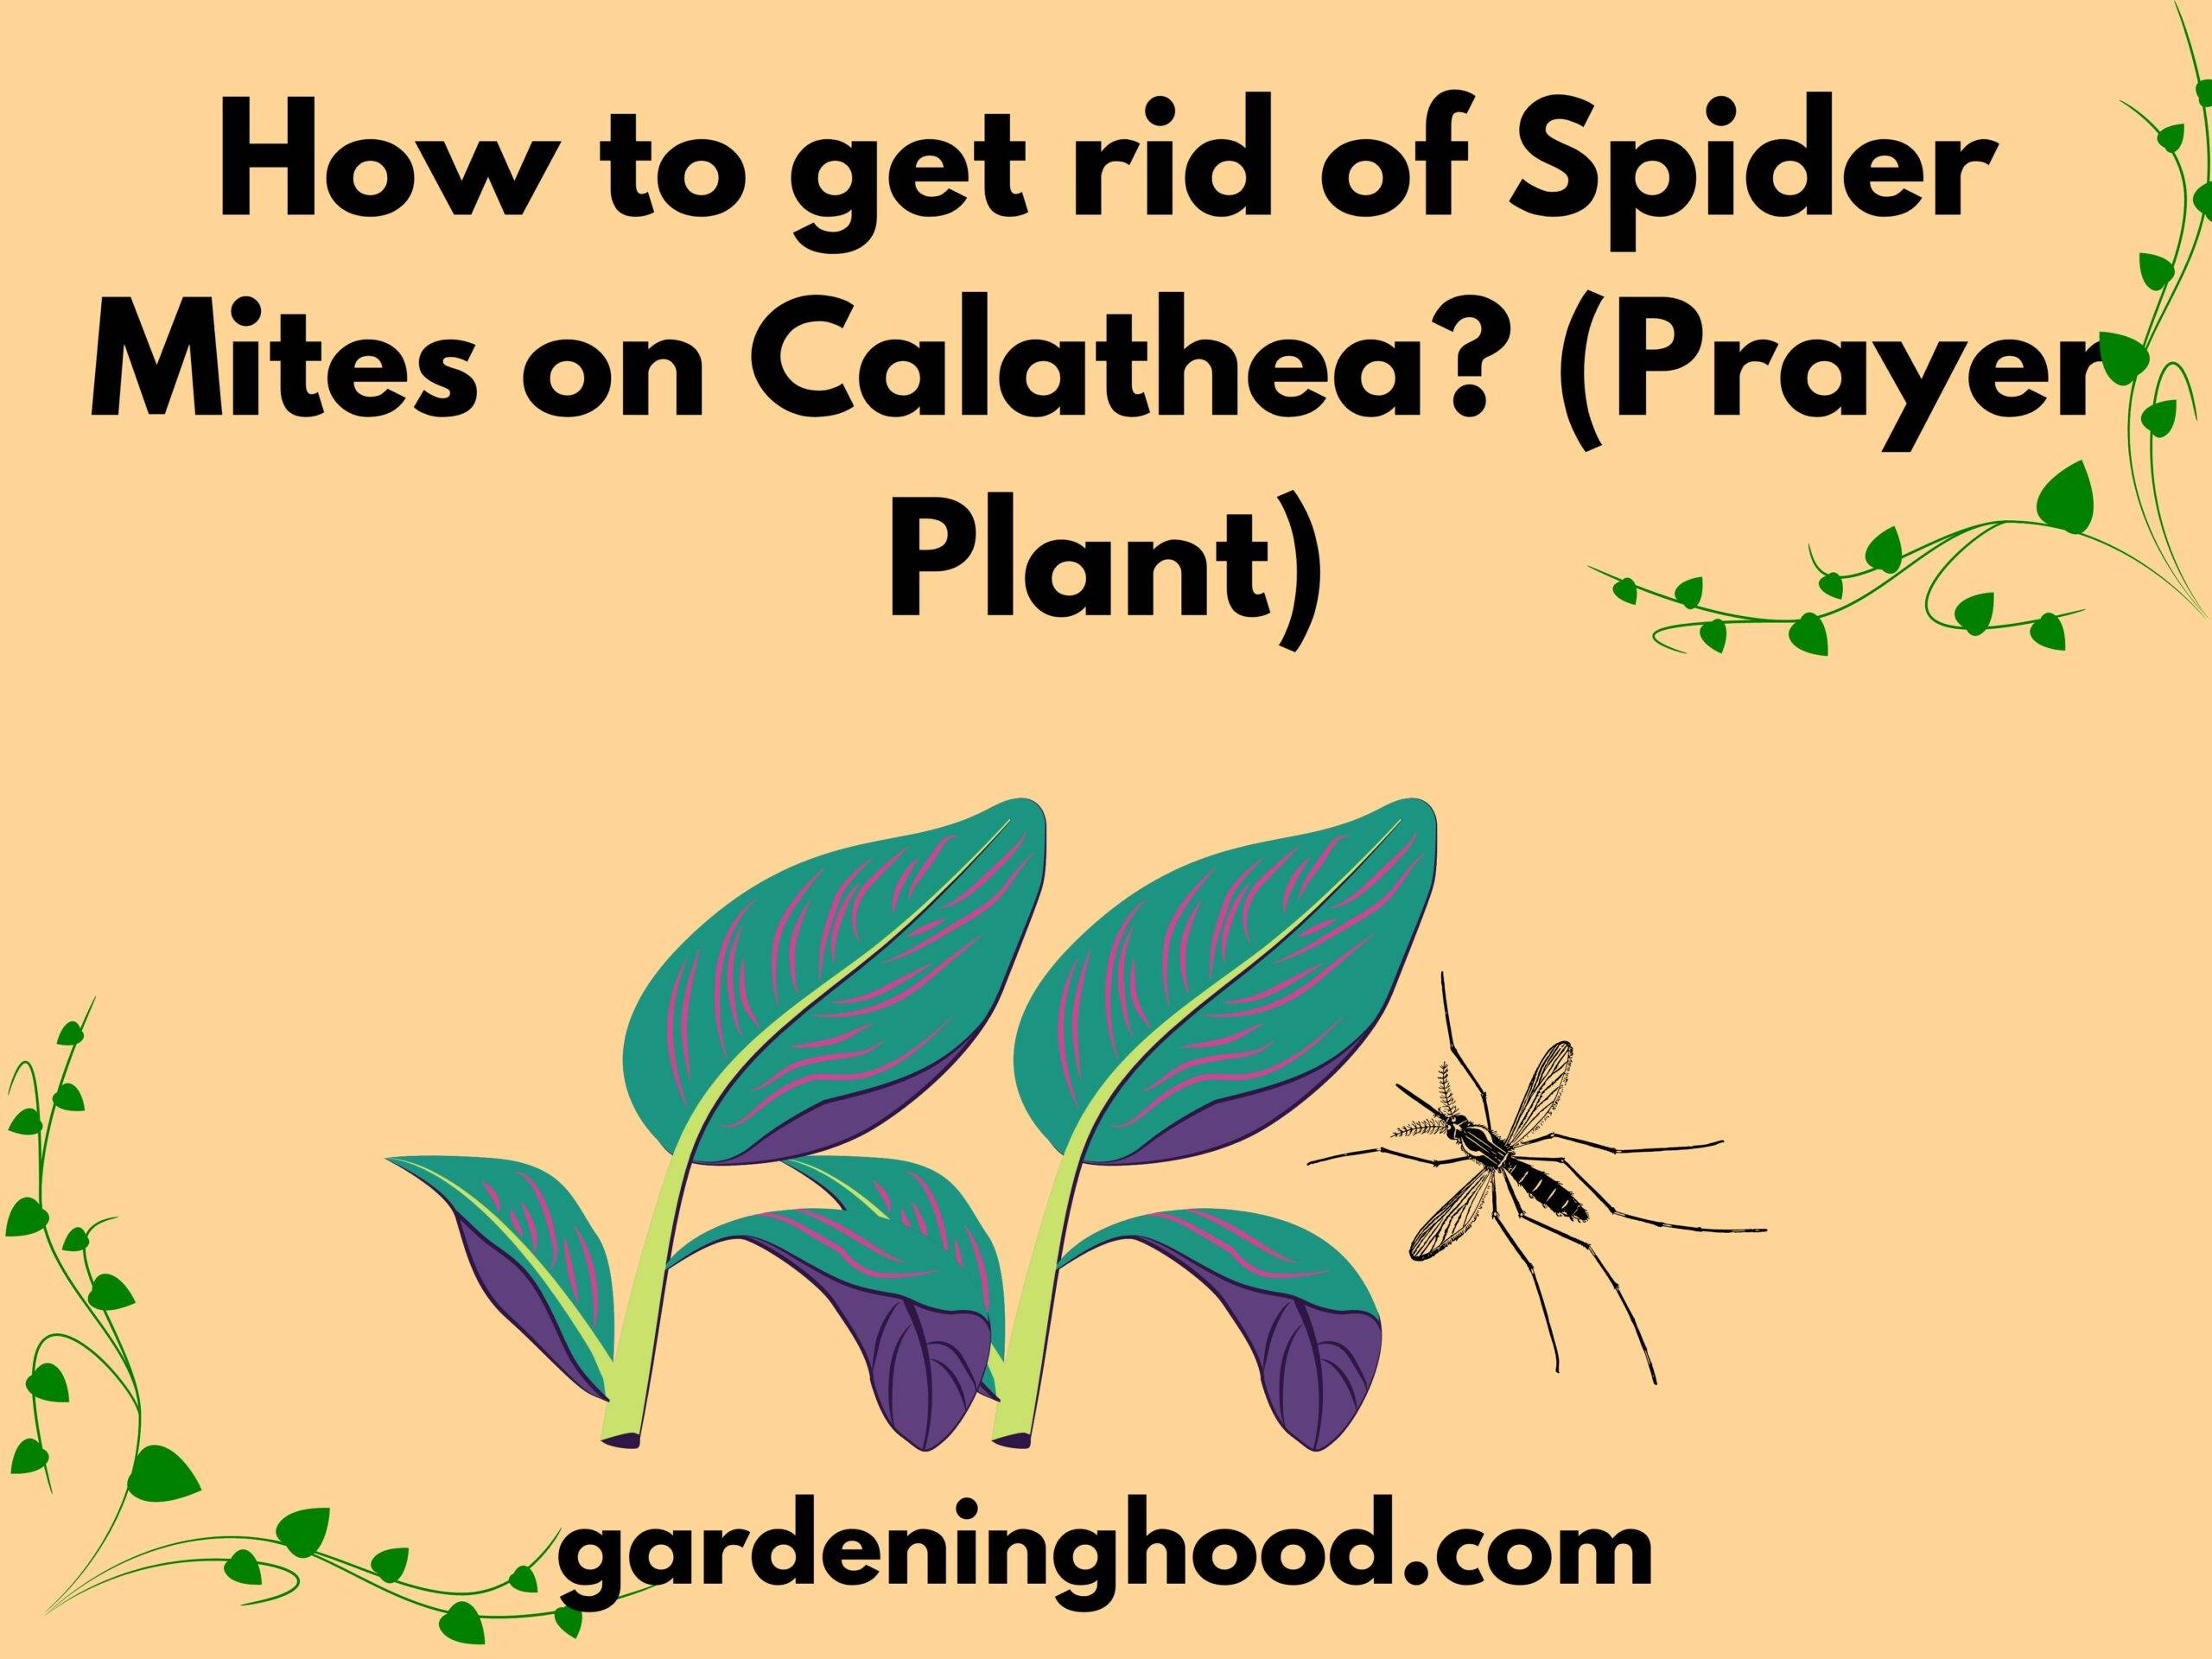 How to get rid of Spider Mites on Calathea? (Prayer Plant)